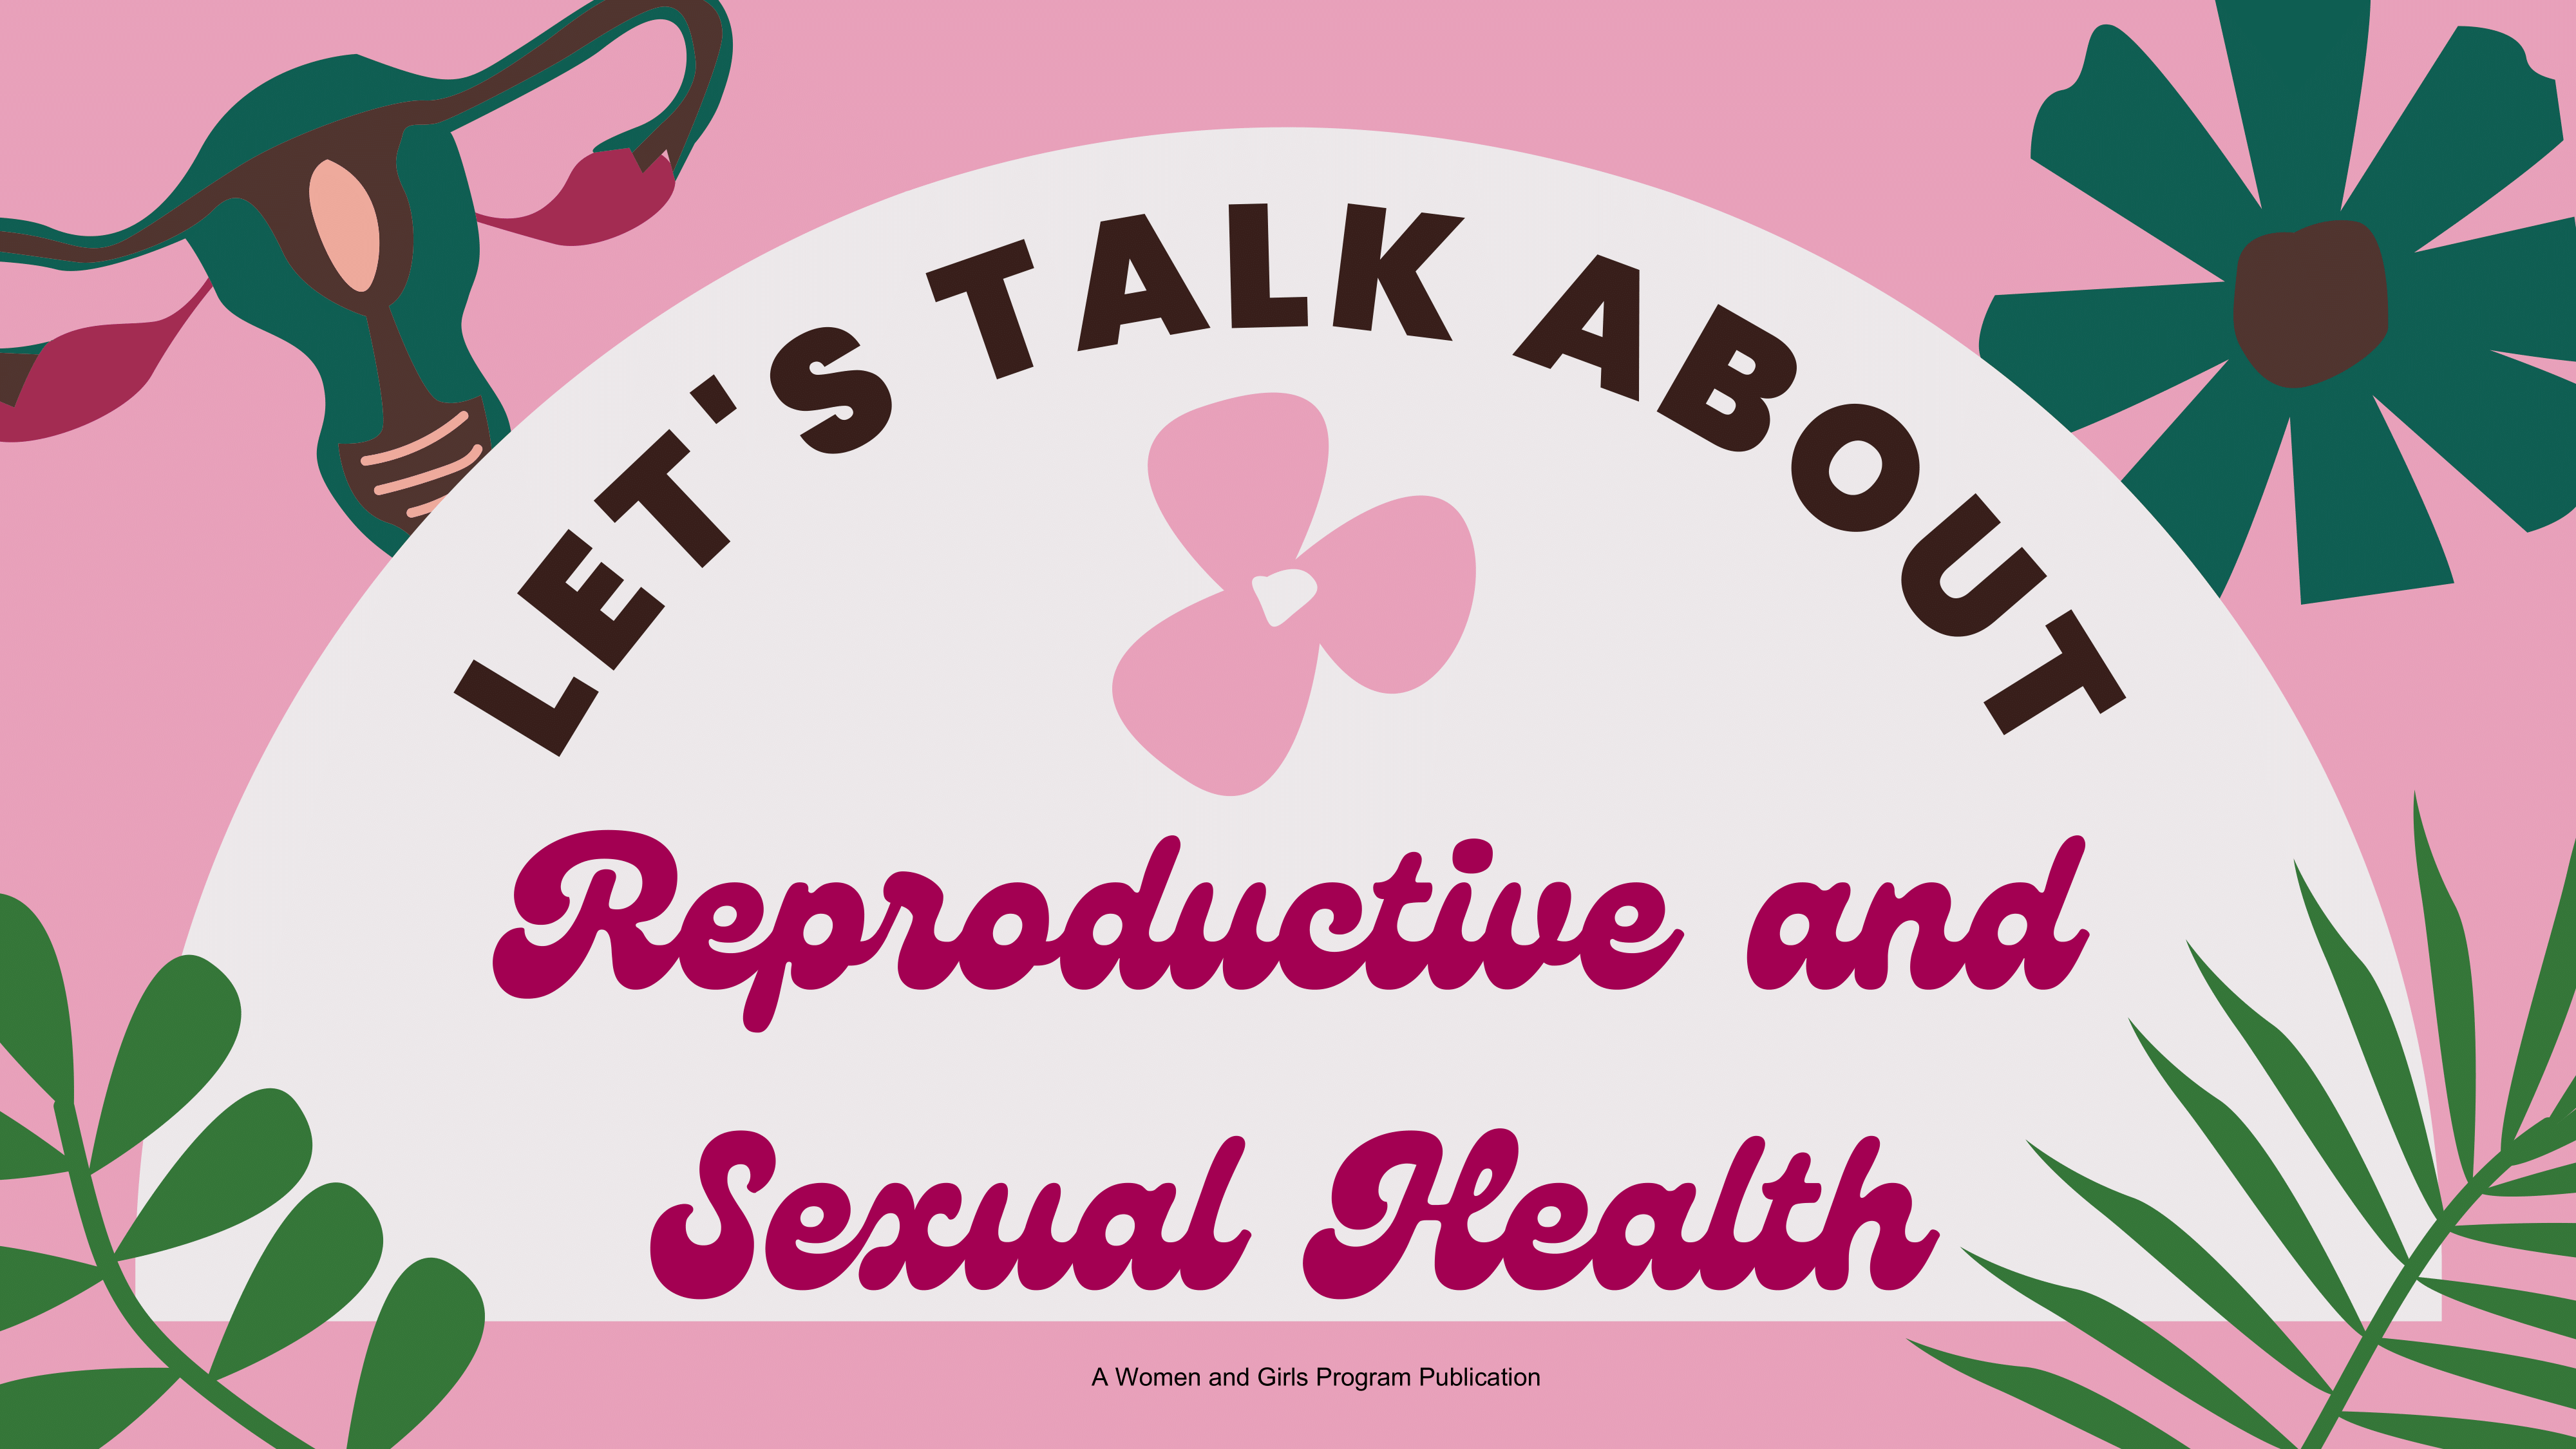 LET’S TALK ABOUT SEXUAL AND REPRODUCTIVE HEALTH